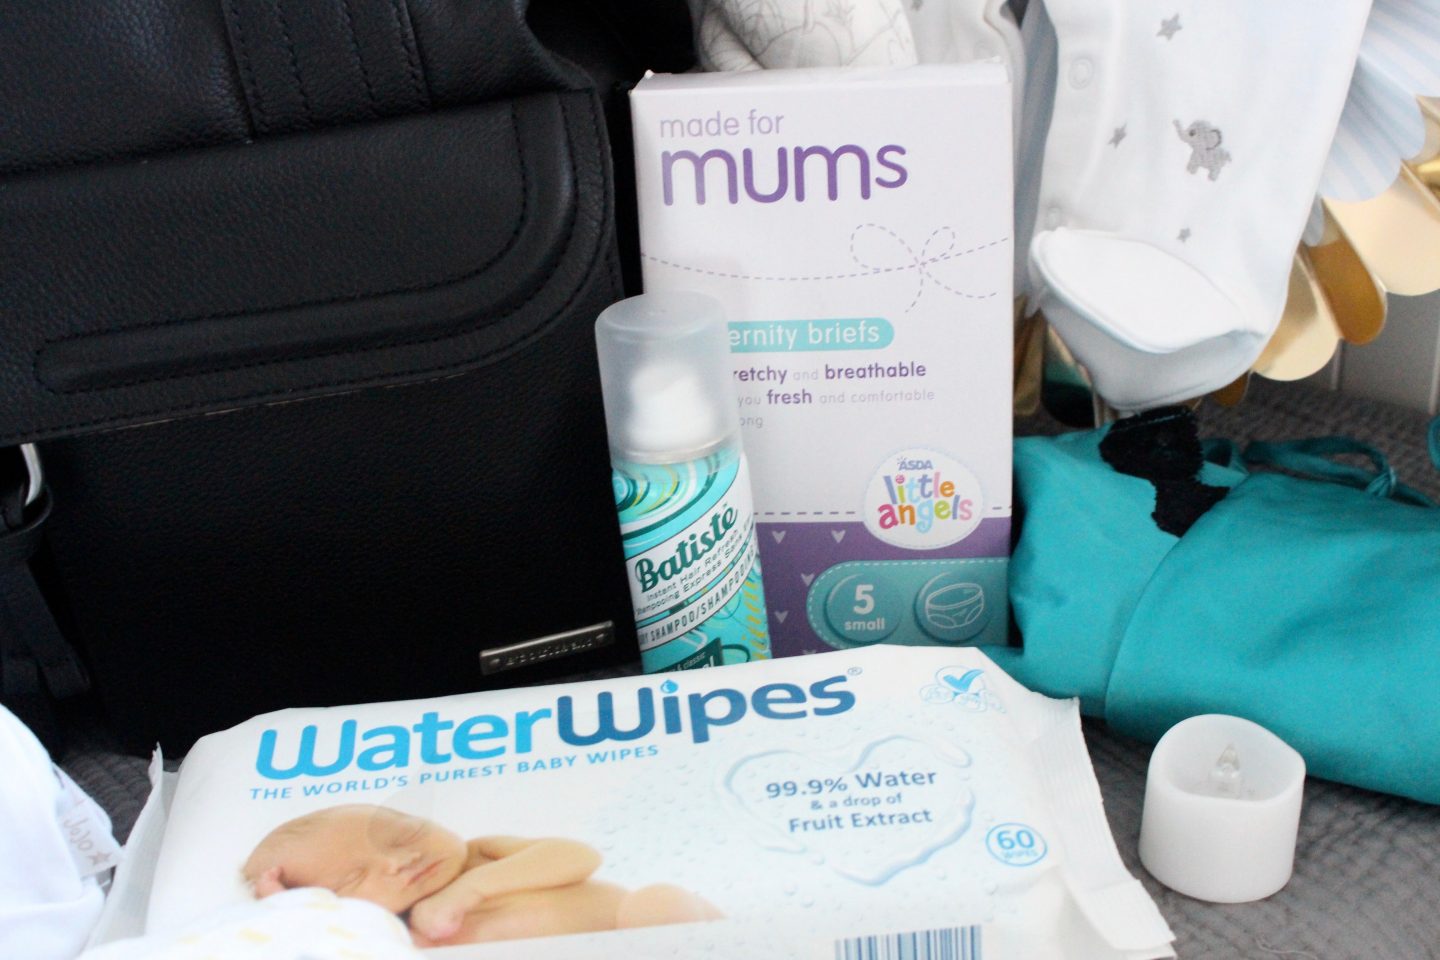 What to Pack in Your Hospital Bag – BambiniWare